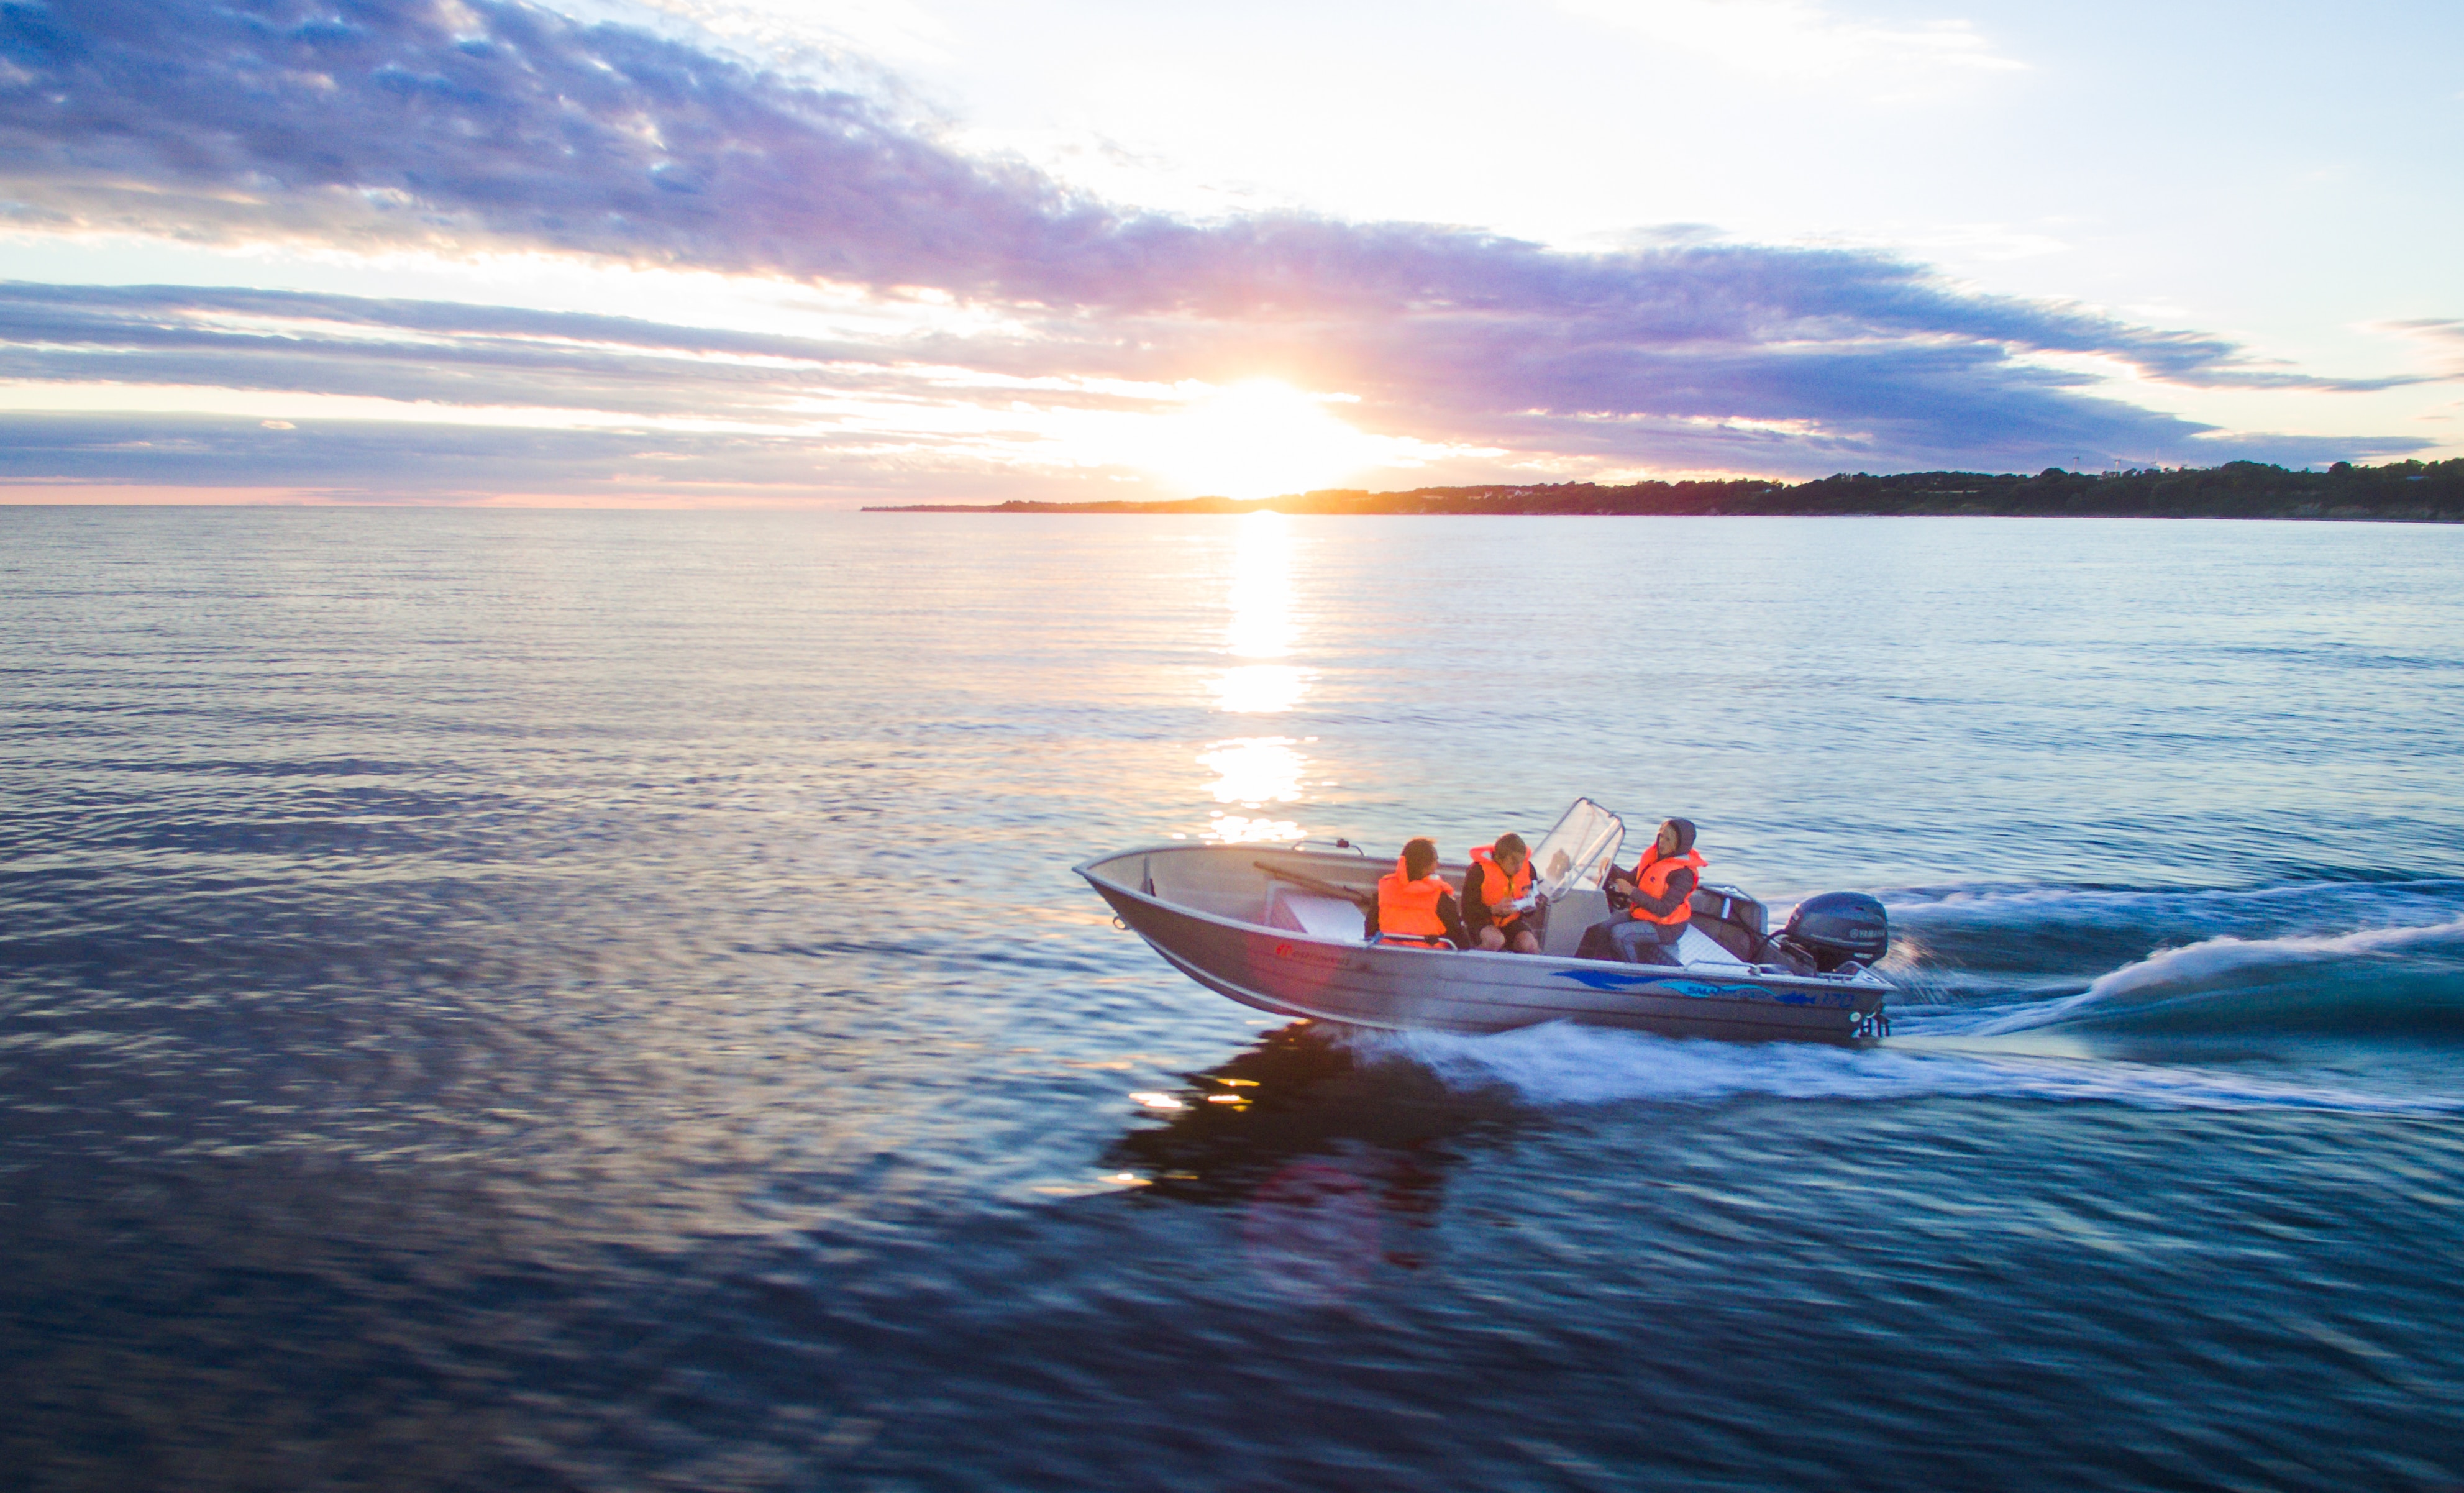 Small boat on the water with three people on board in life jackets at sunset.